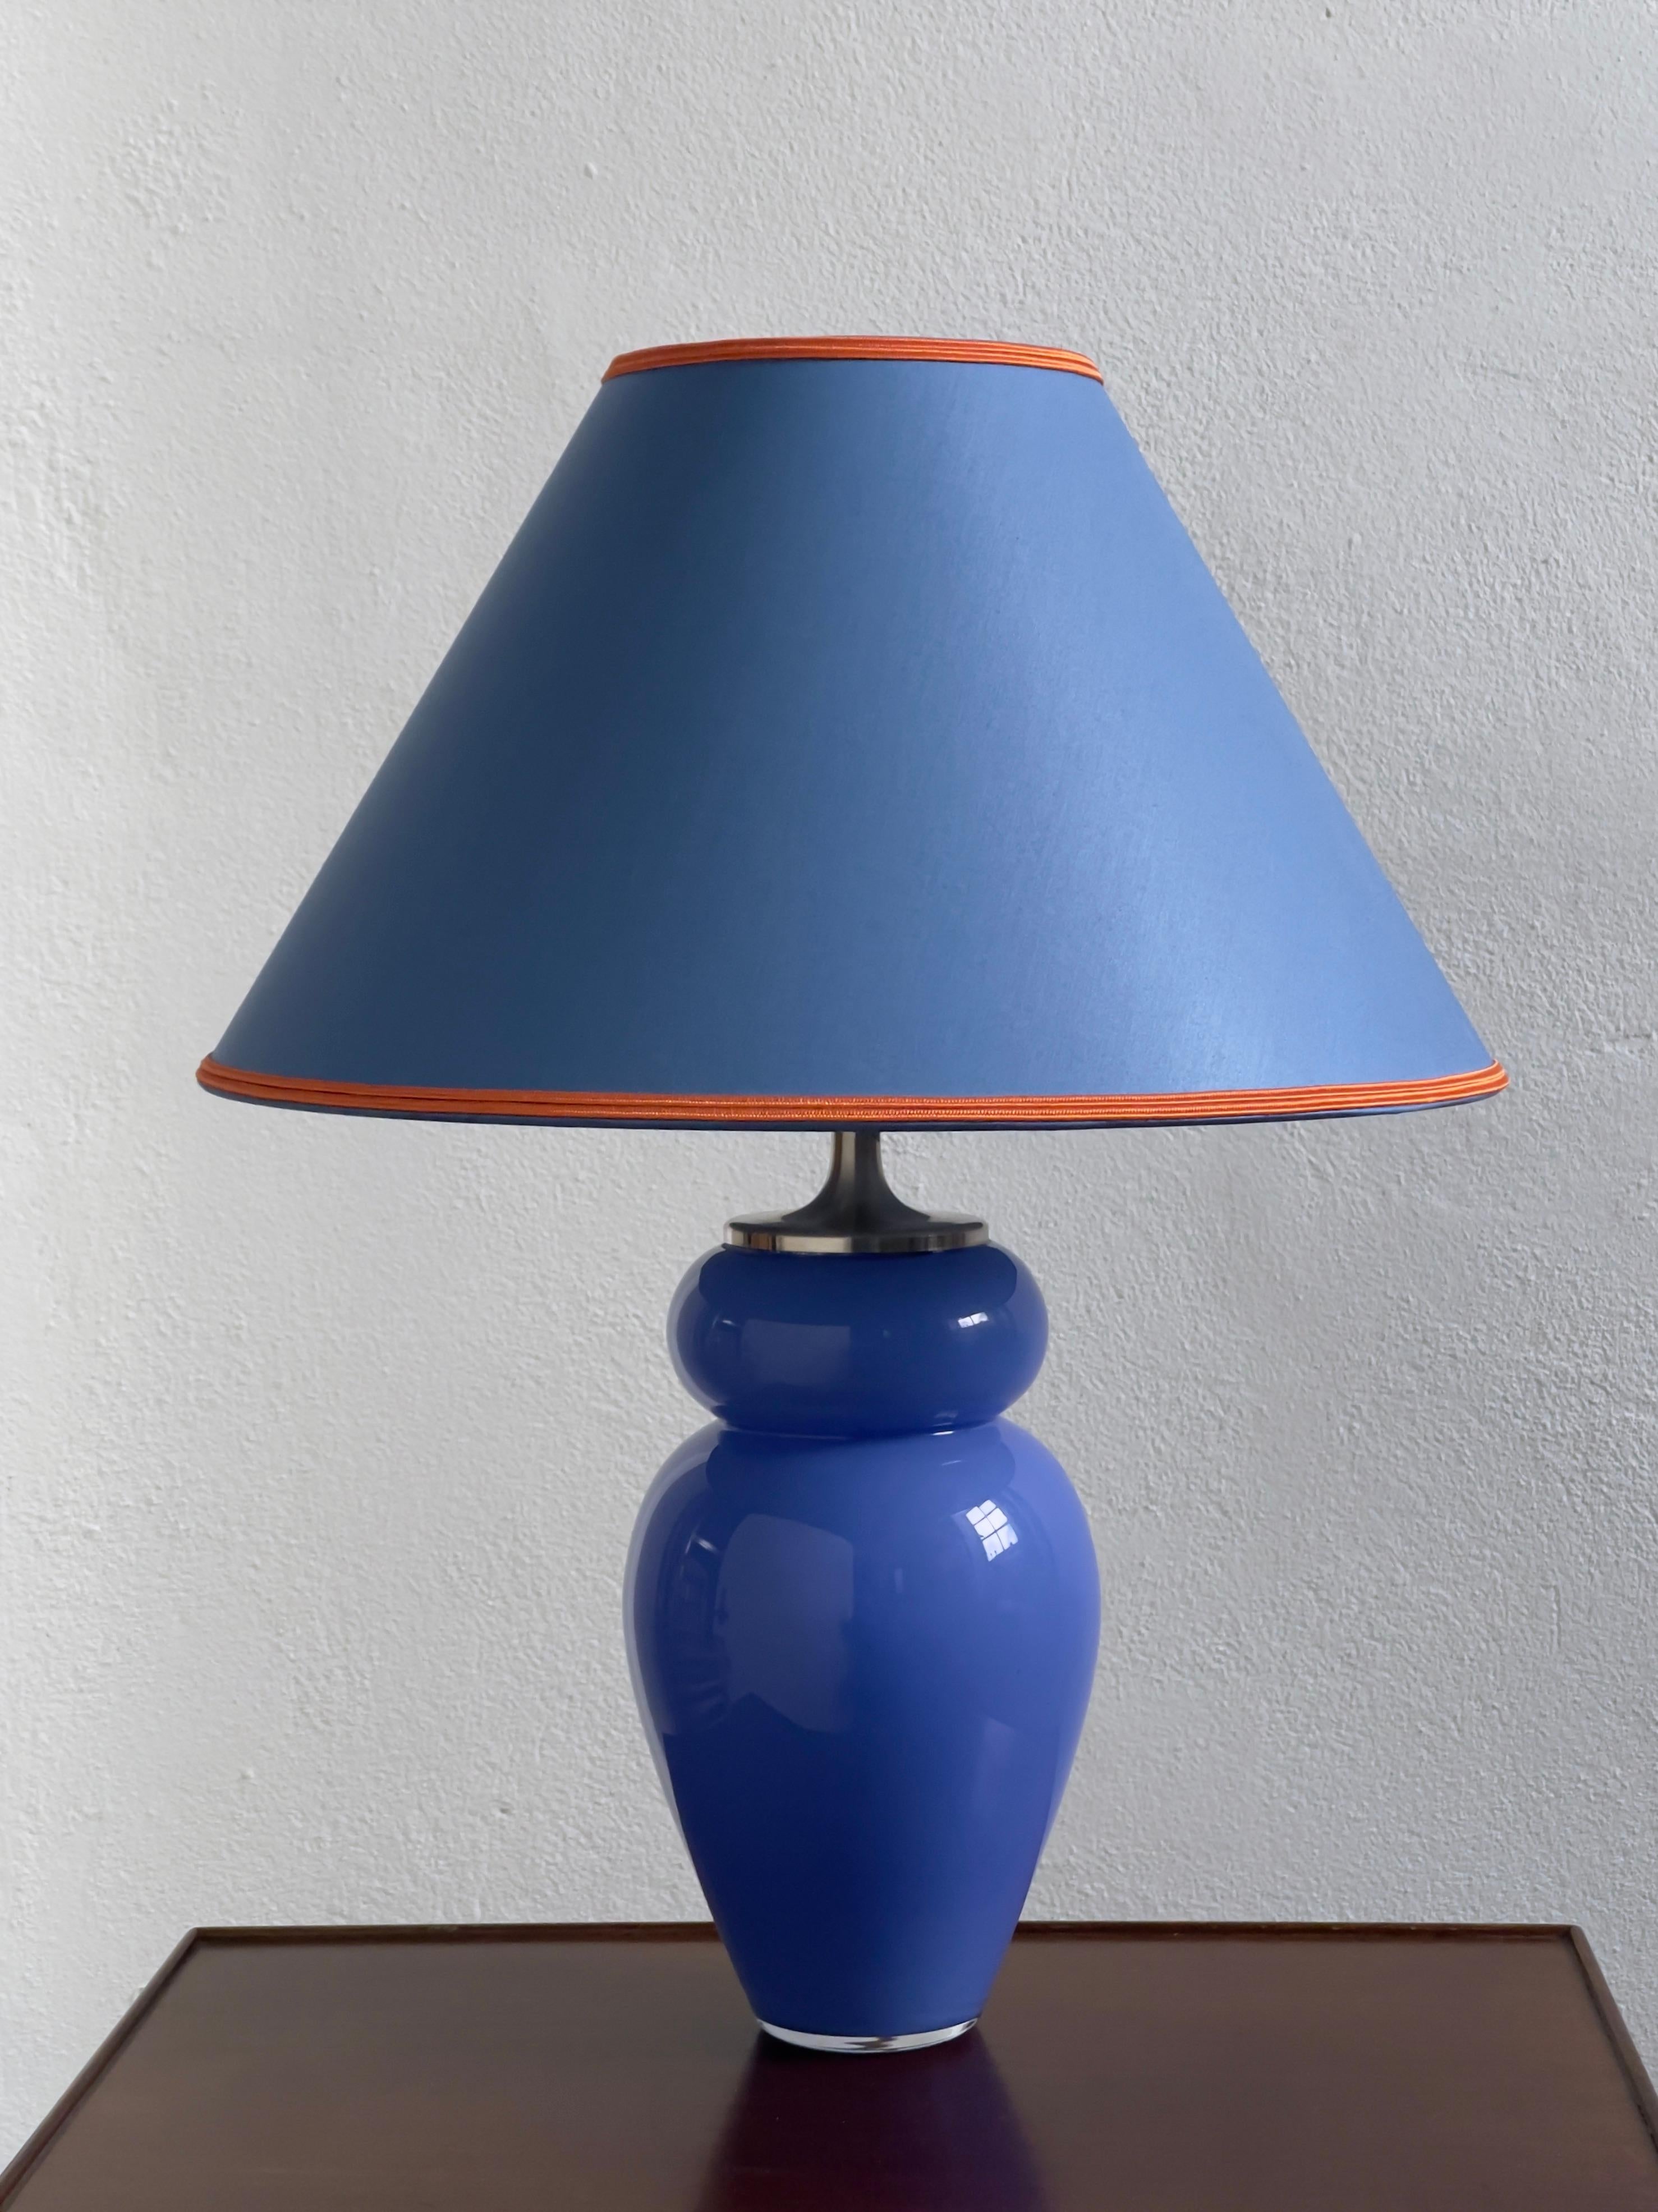 Scandinavian Modern 1980s Blue Crystal Glass Table Lamp with Blue Shade by Royal Copenhagen, Denmark For Sale